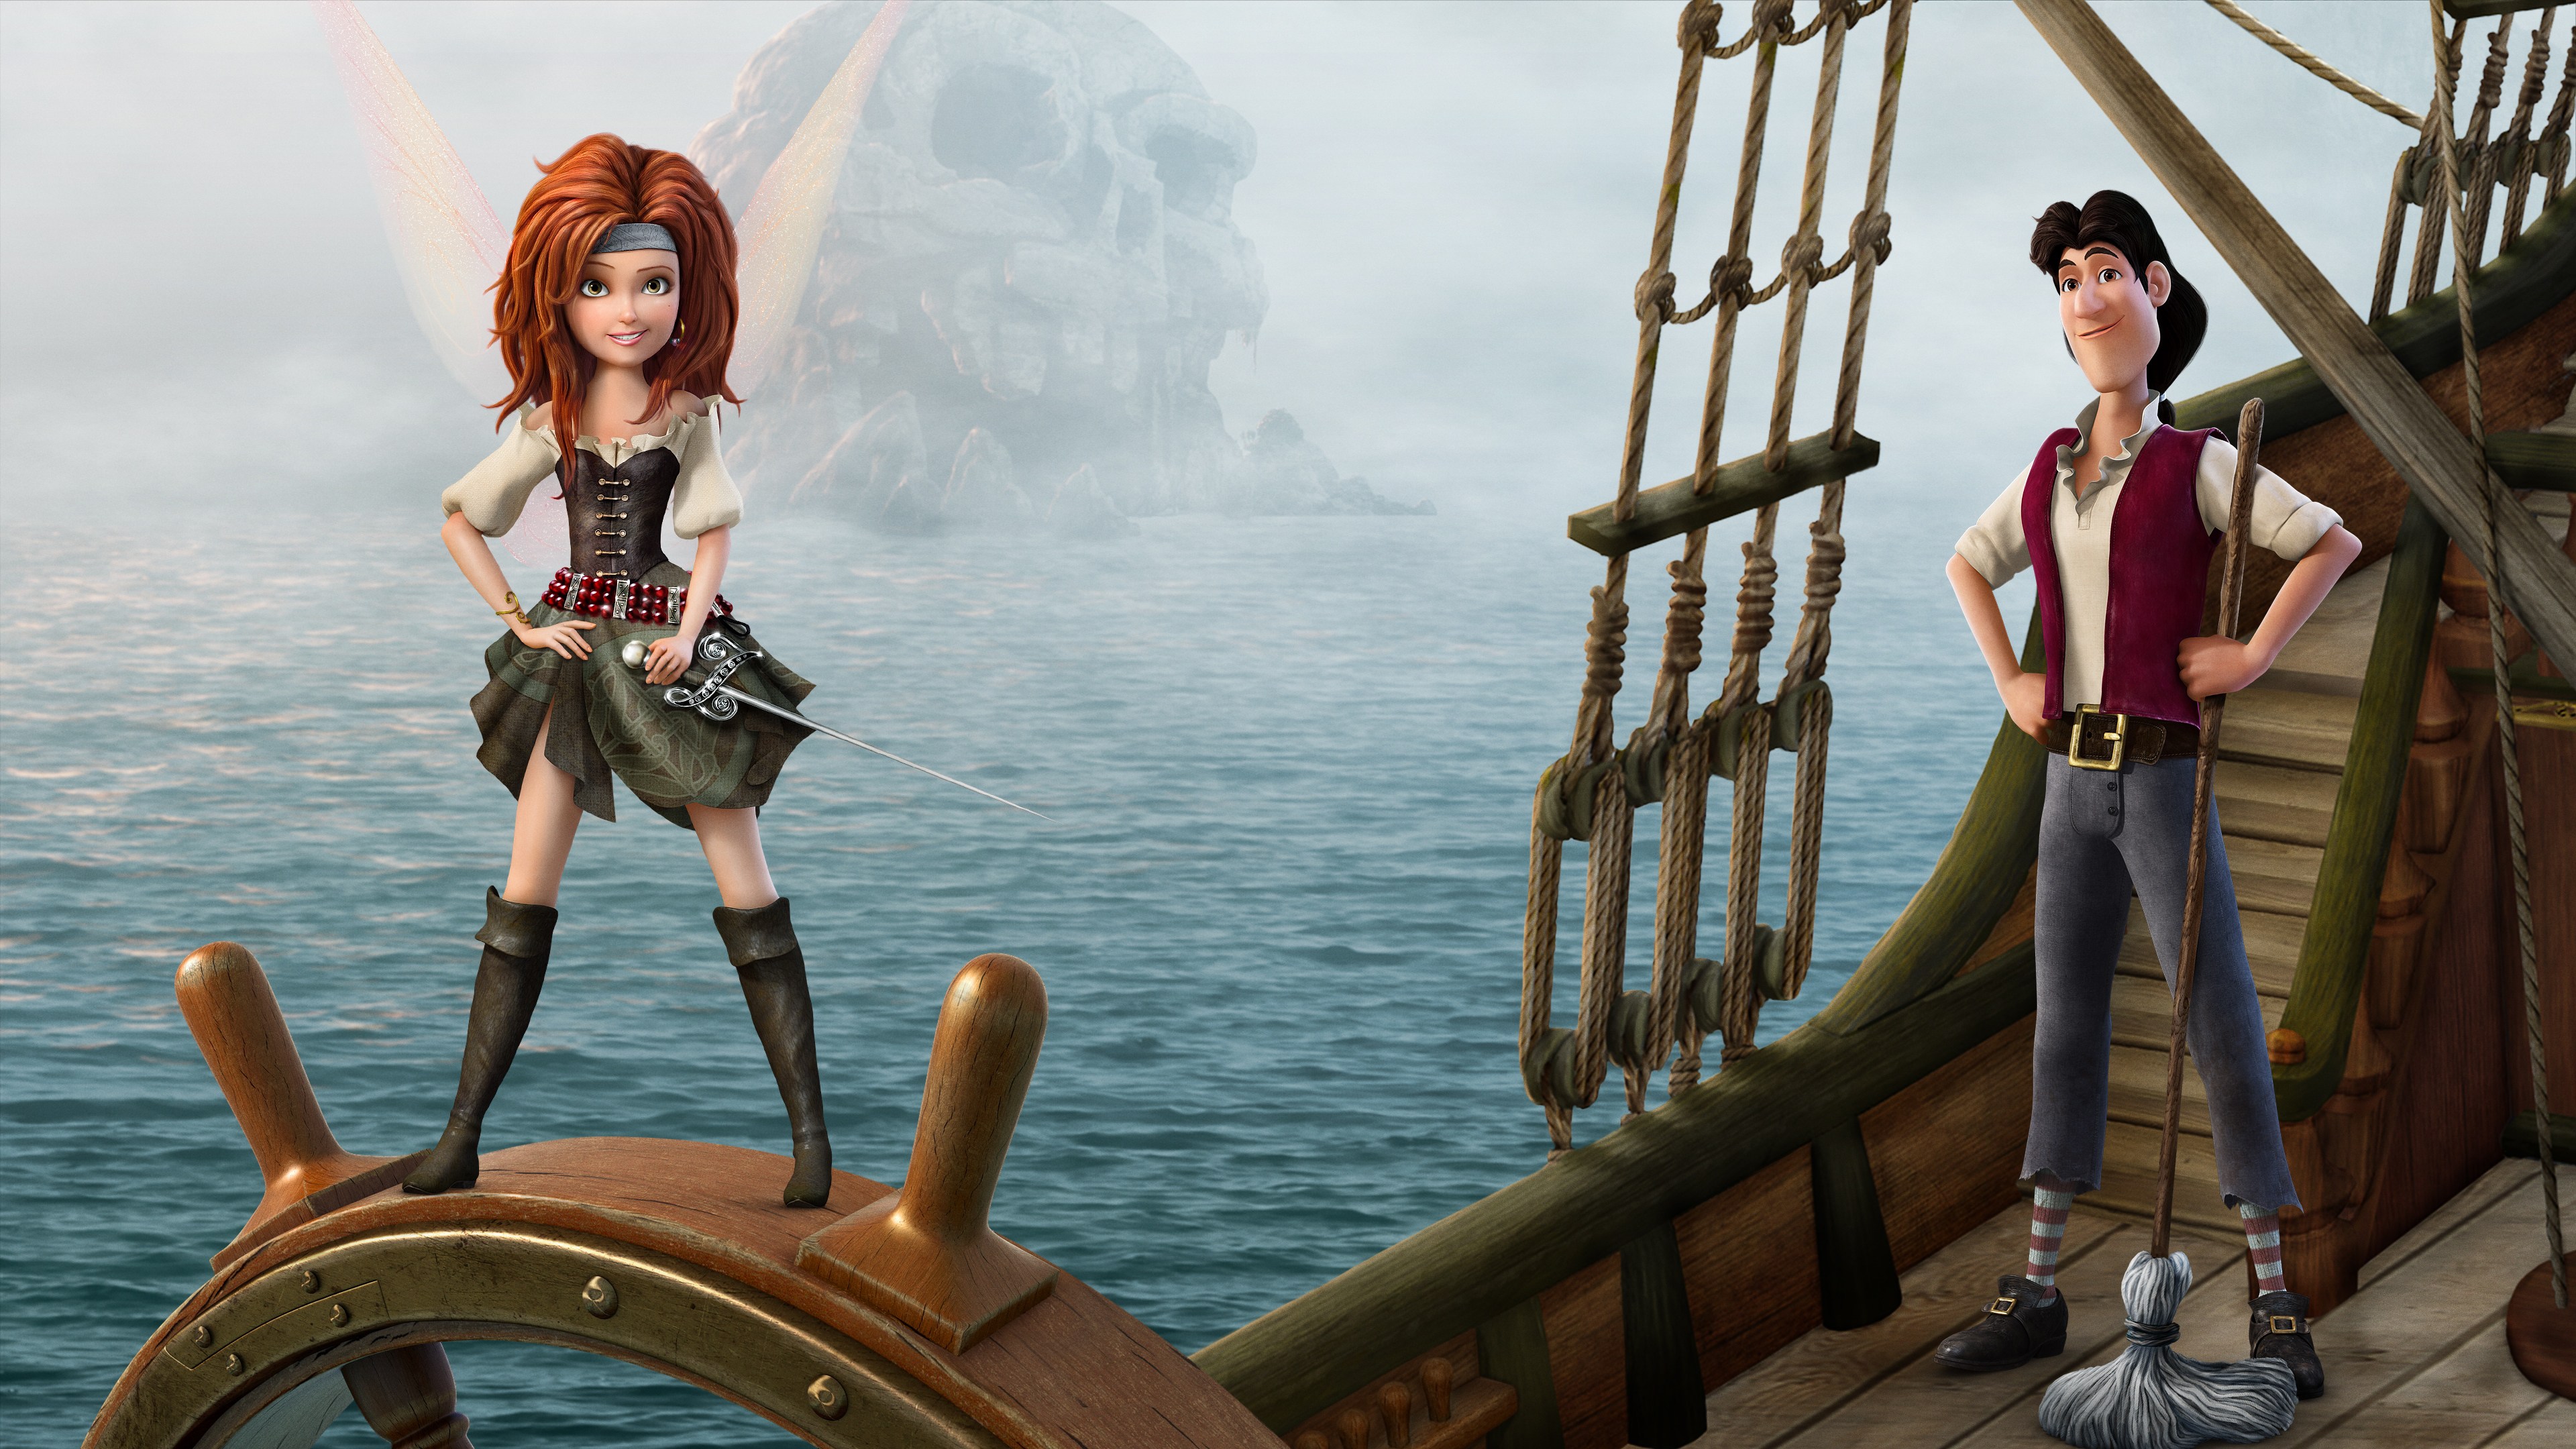 Amazing The Pirate Fairy Pictures & Backgrounds